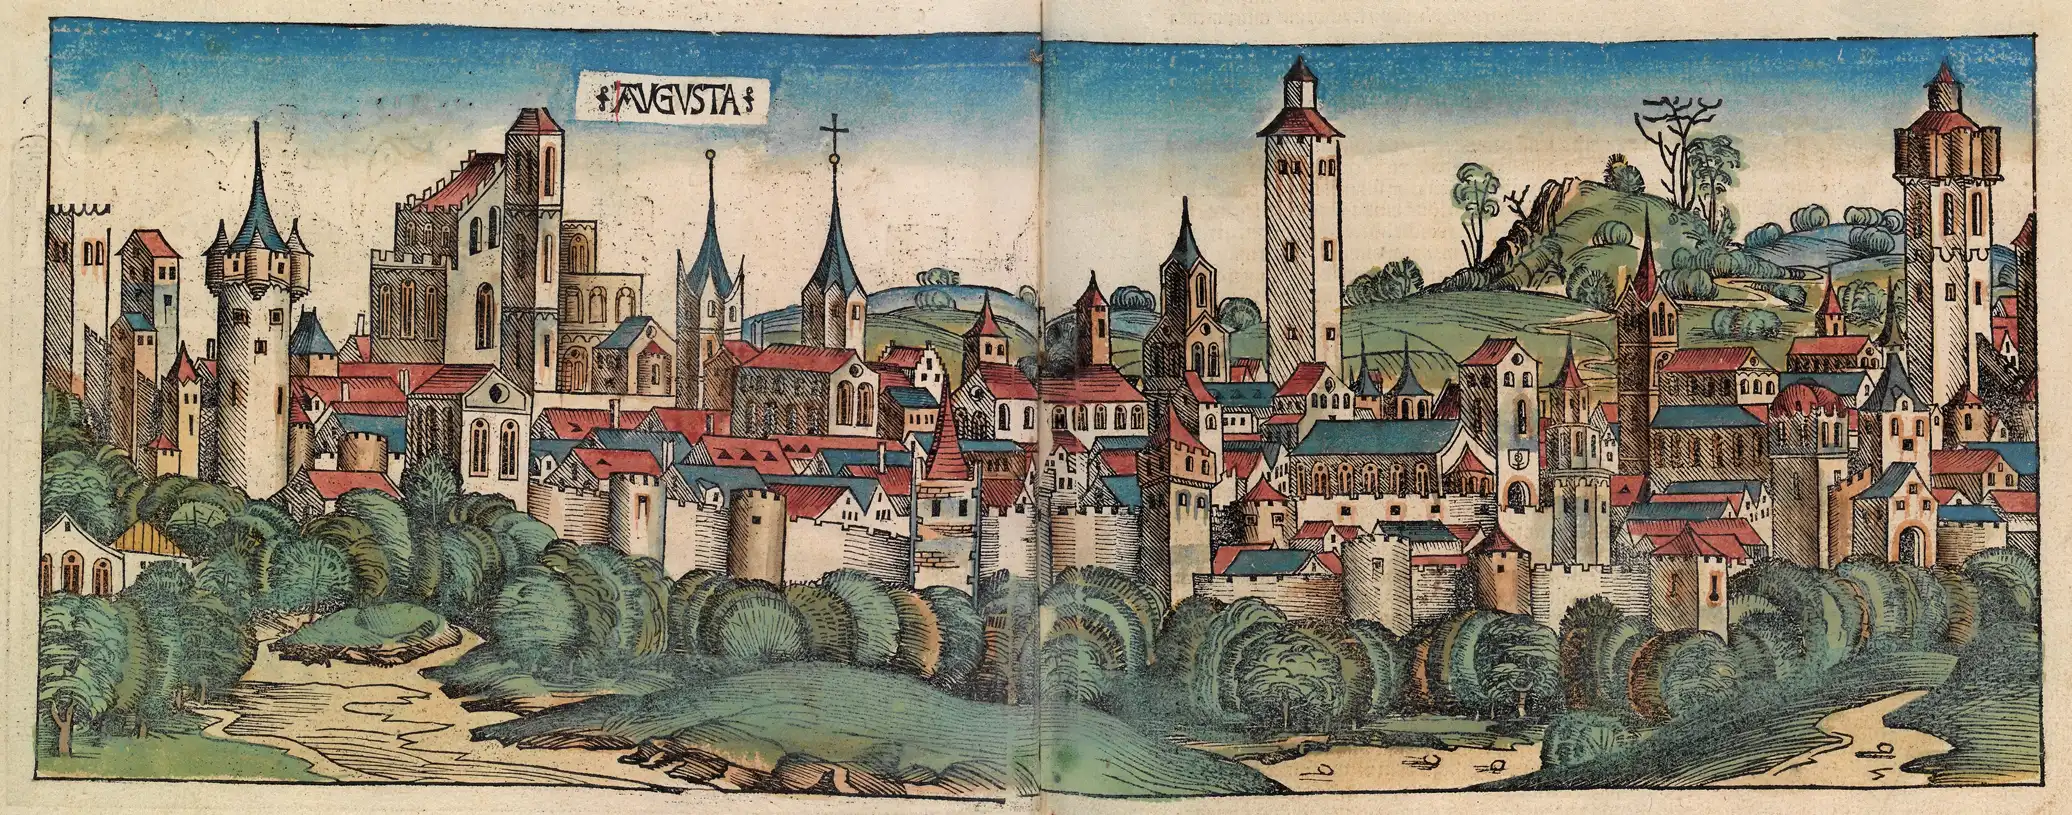 Woodcut of Augsburgs from the Nuremberg Chronicle, 1493